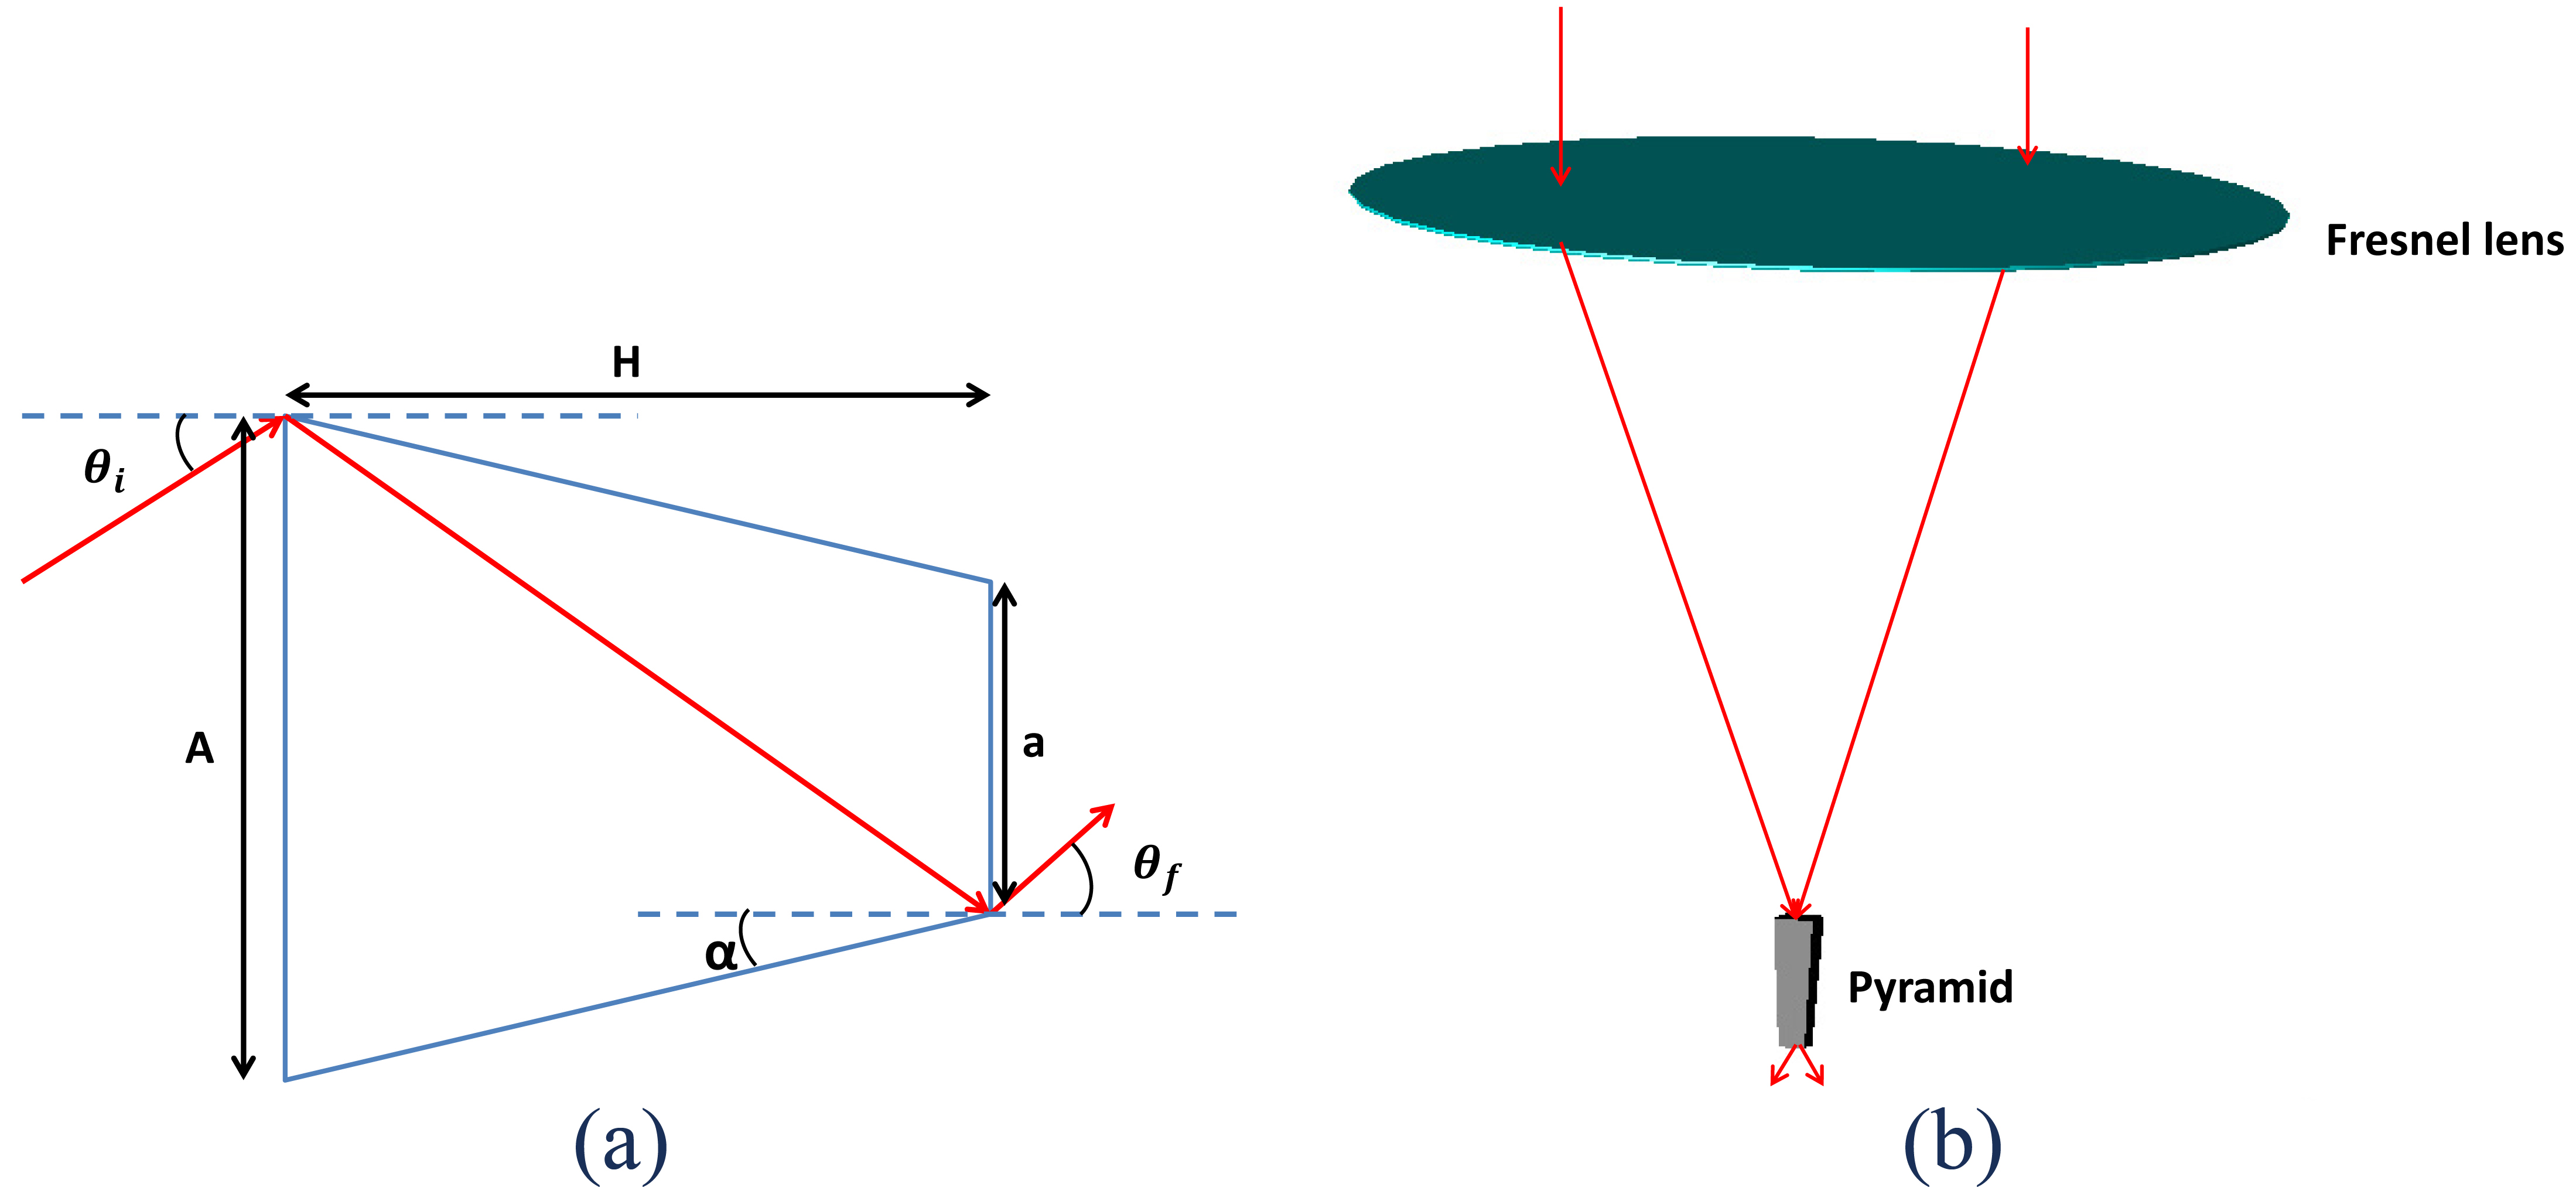 Schematic view of pyramid (a) 2D and (b) 3D.